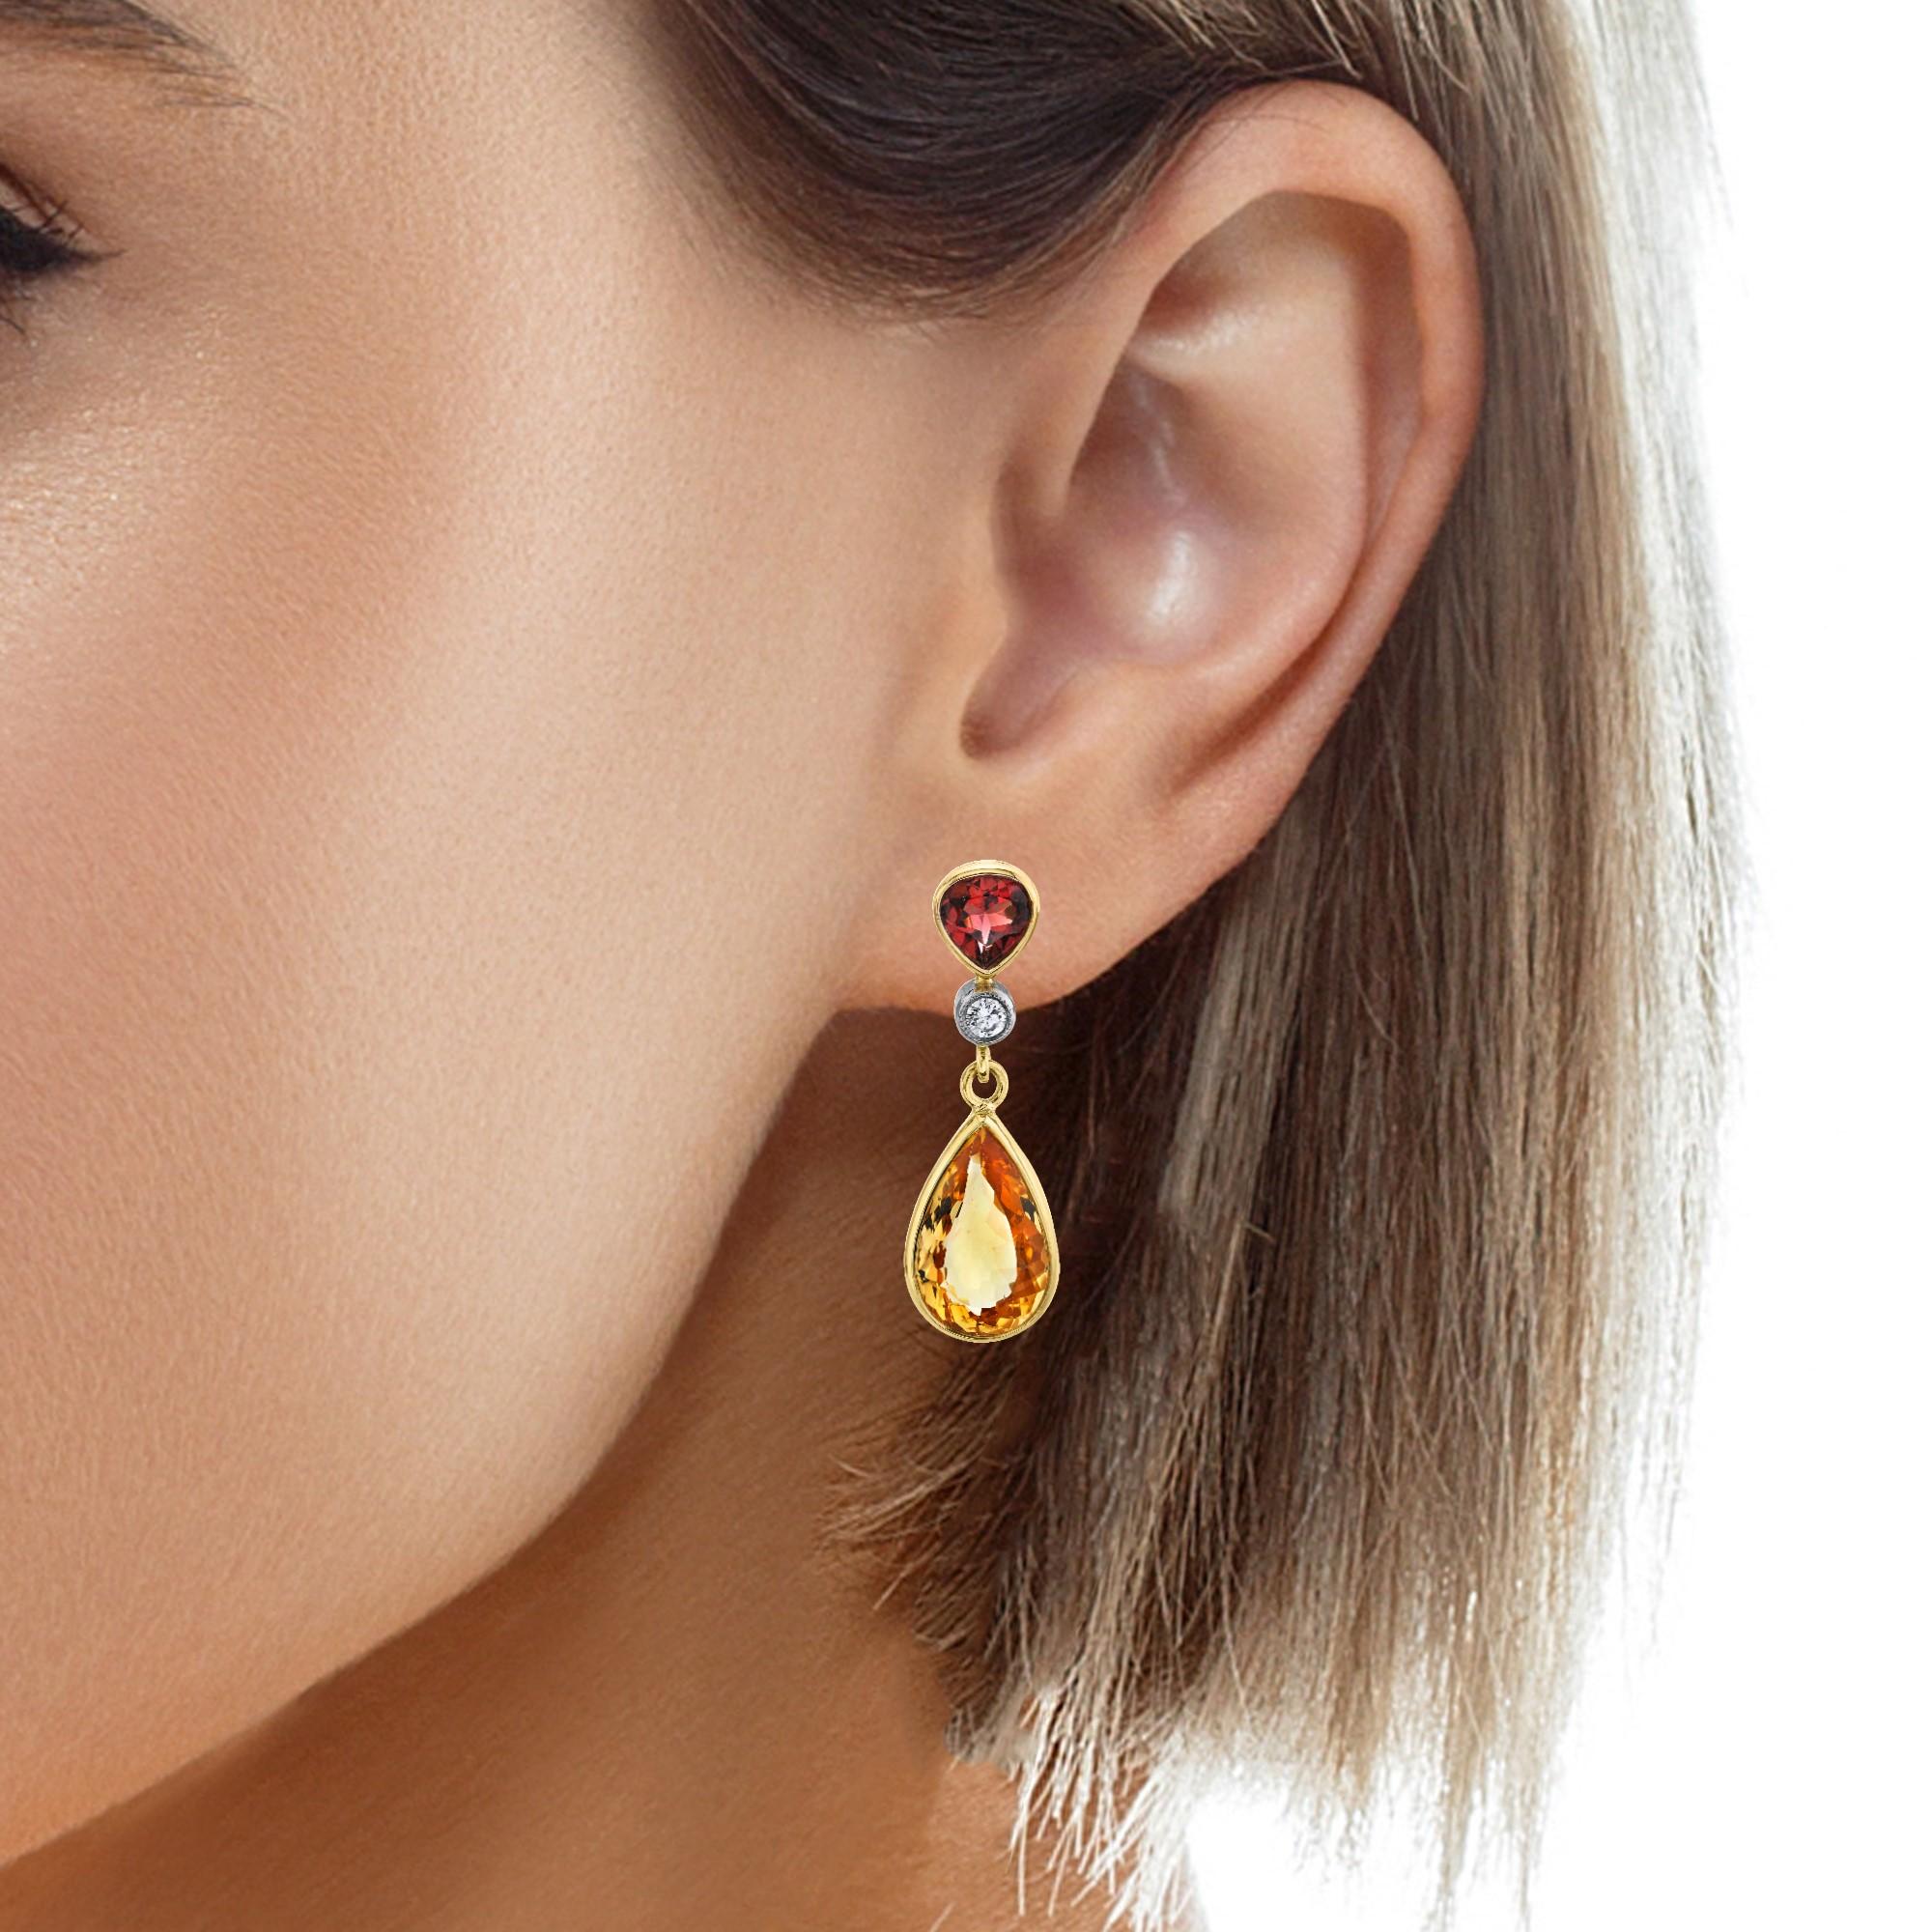 Precious Topaz and Garnet Drop Earrings 18K Yellow Gold, 9.74 Carats Total  For Sale 4